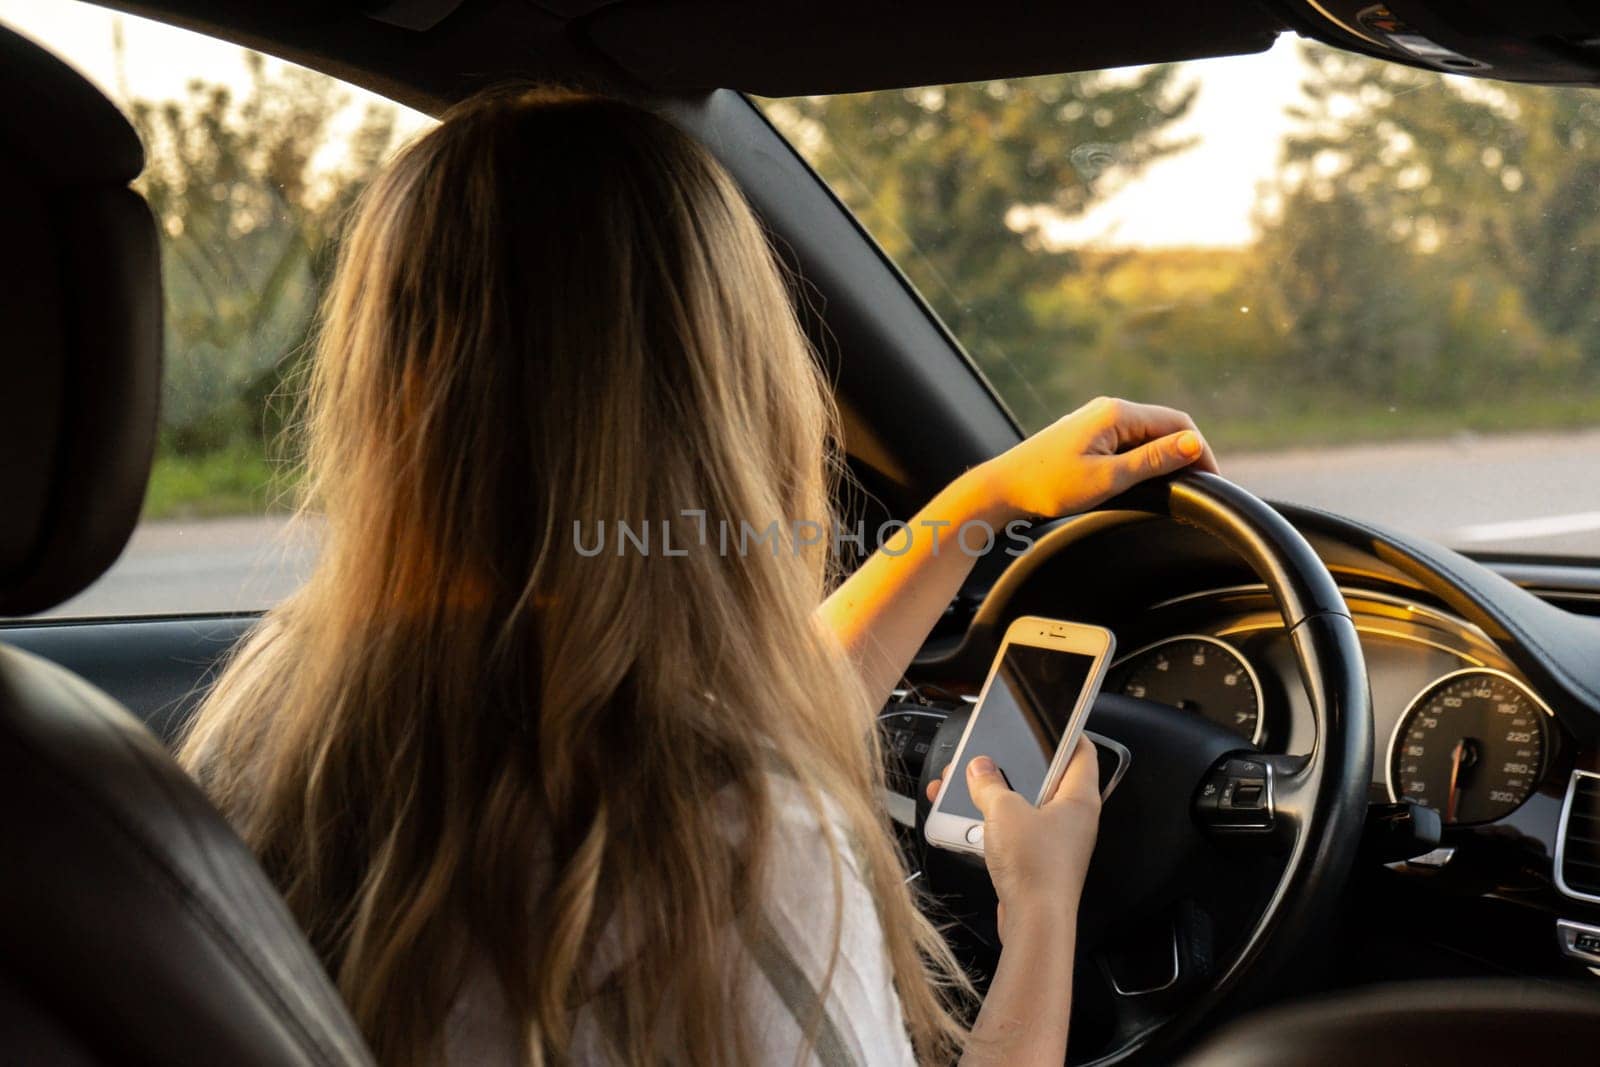 Woman sending messages with smartphone while driving automobile. Female driver using mobile phone on the road during driving the car. Safety and technology concept